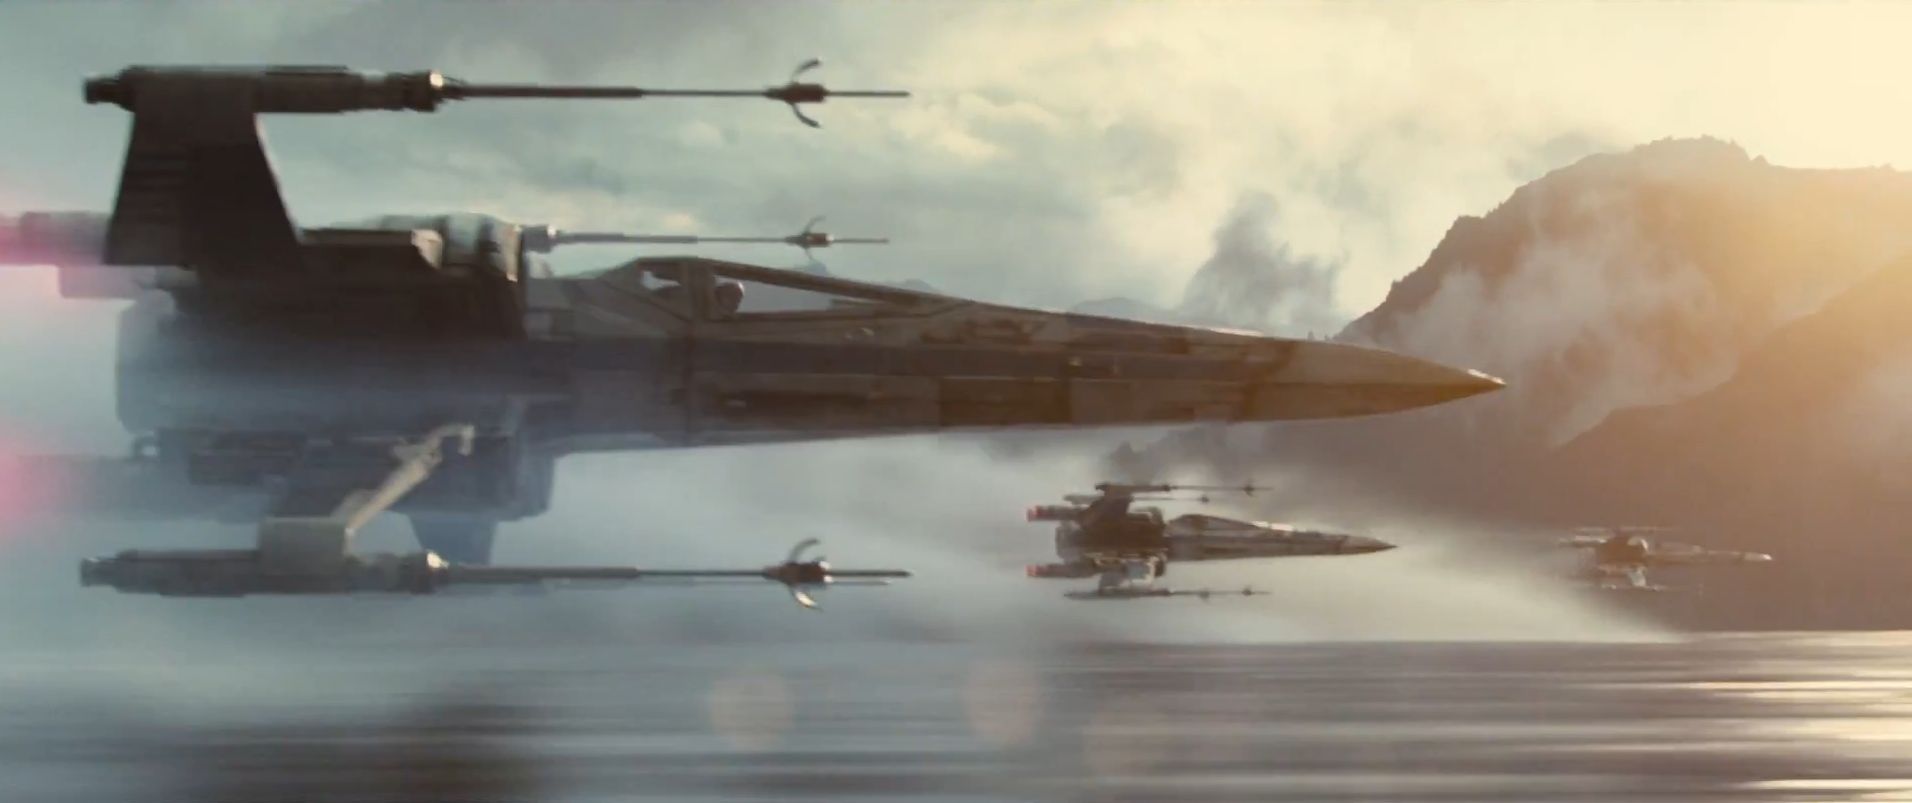 Watch The New Star Wars Force Awakens Trailer Here